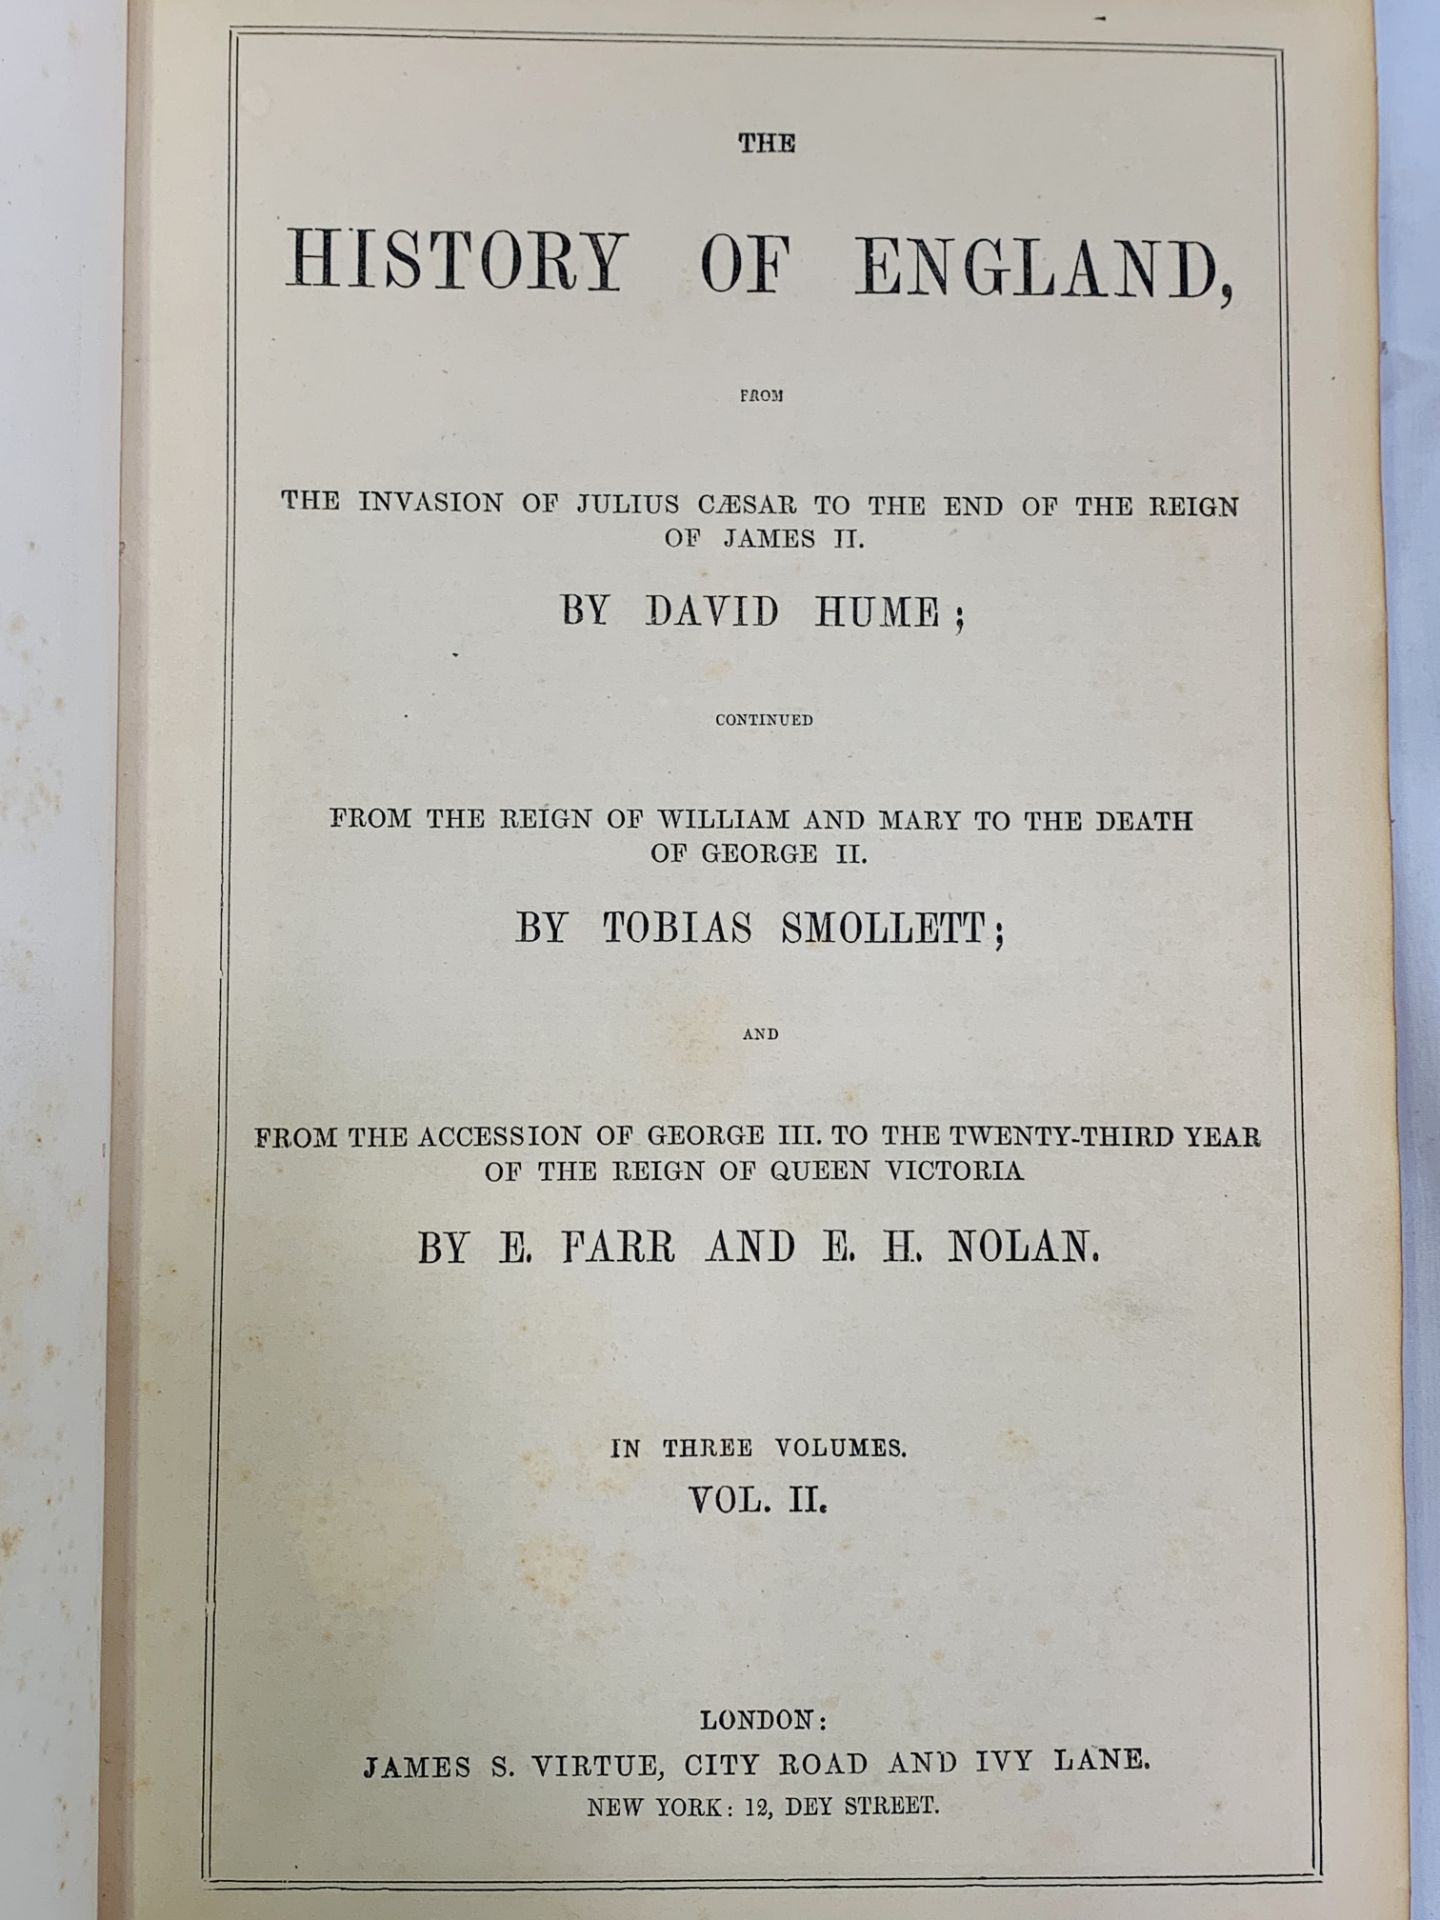 The History of England by Hume, Smollett & Nolan, in 3 volumes bound in full leather - Image 3 of 6